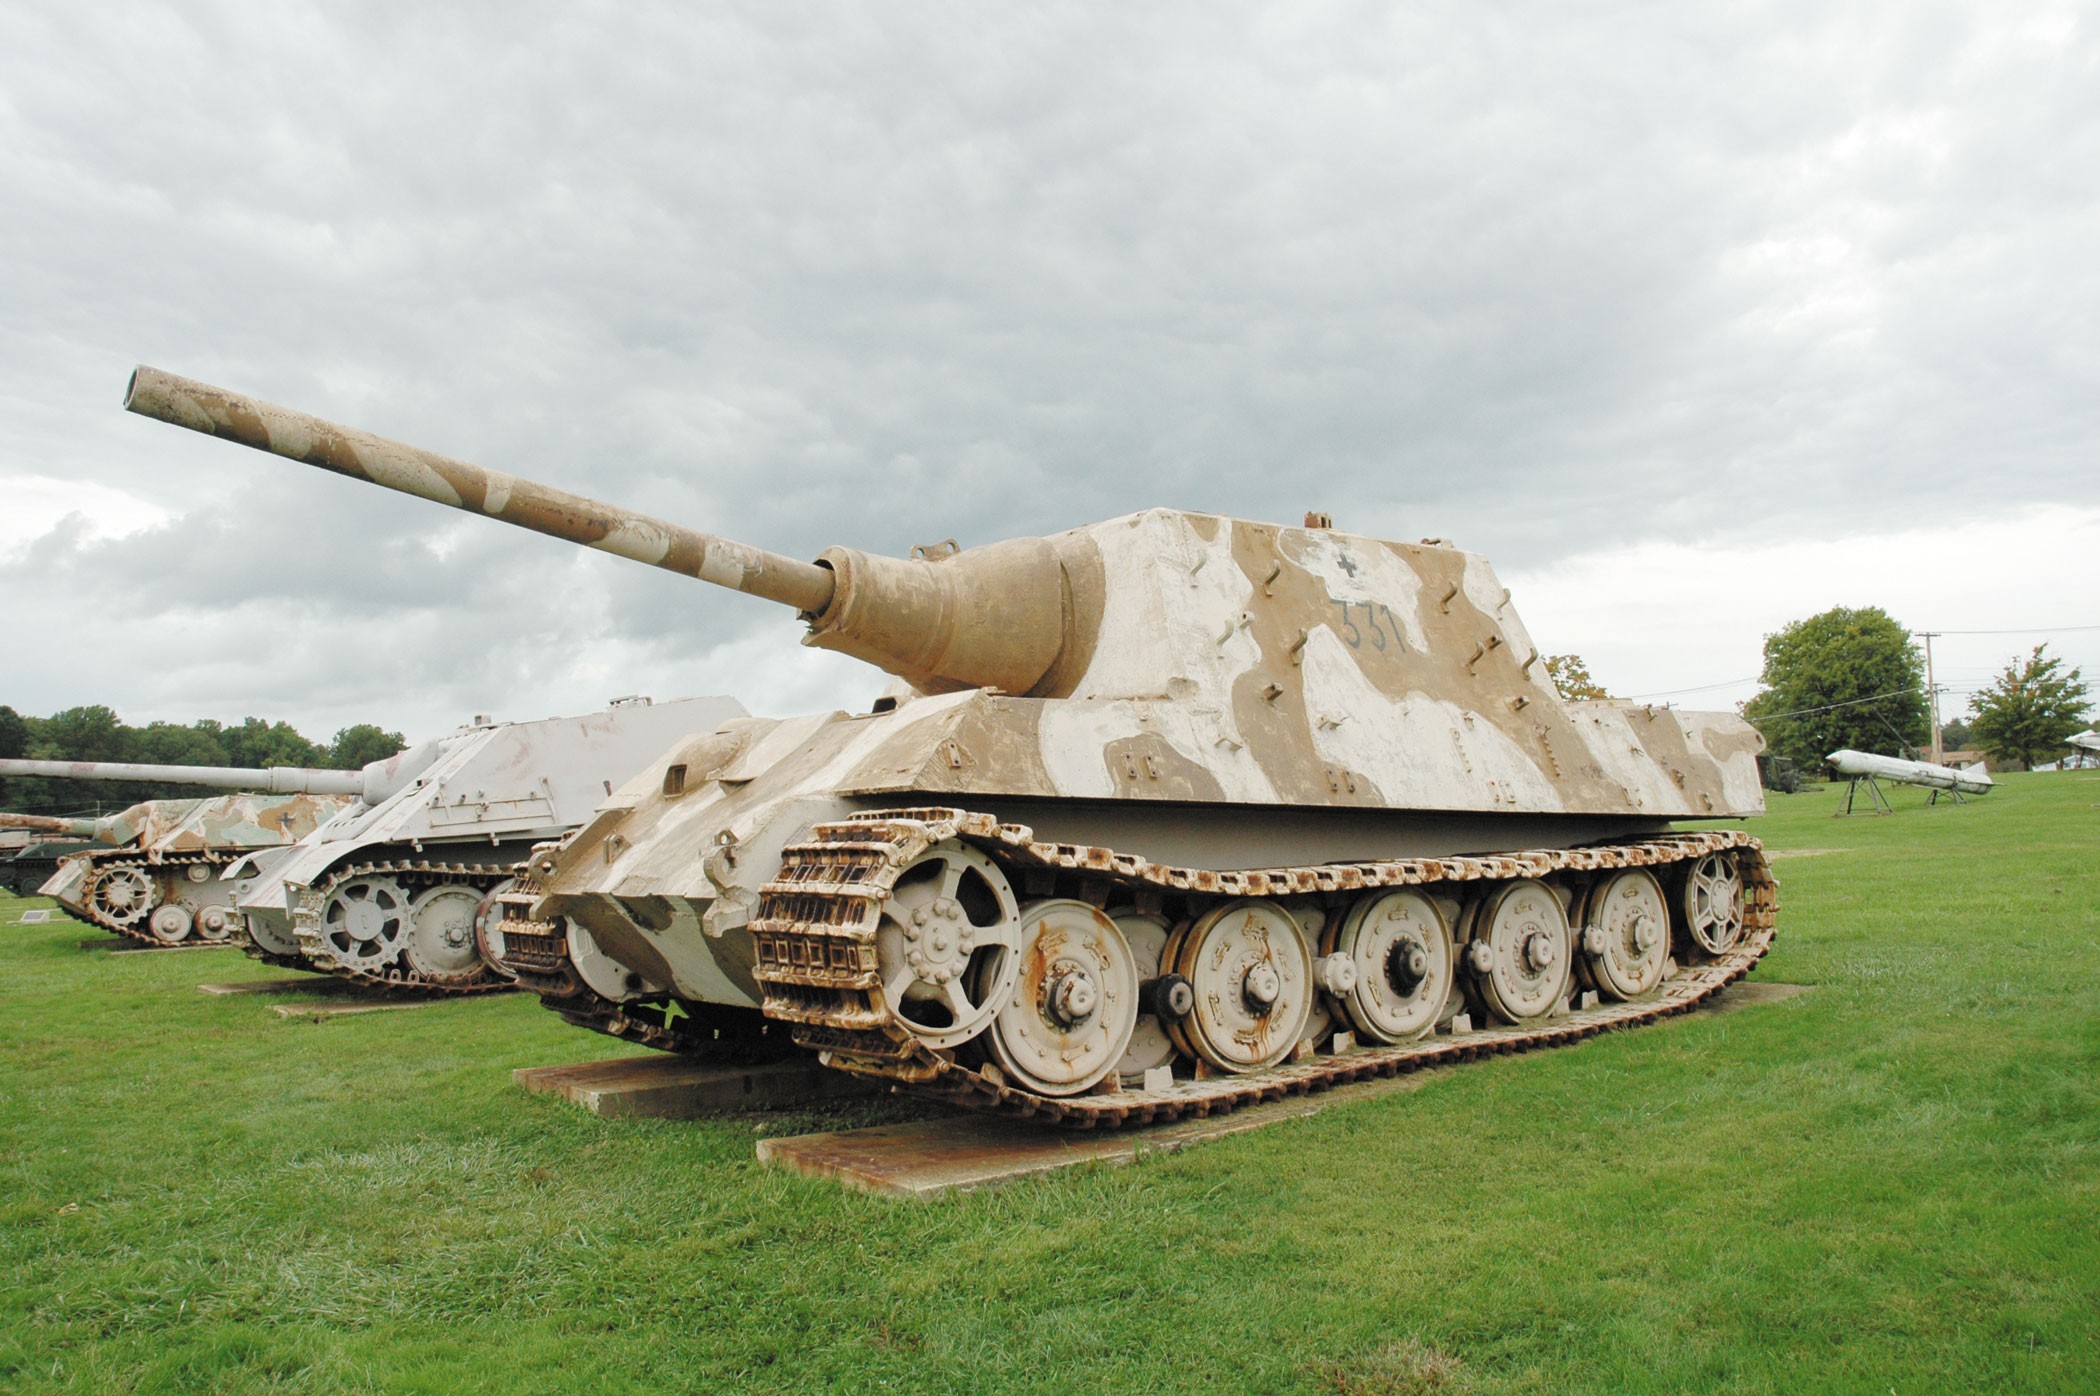 Ordnance Museum looks to future | Article | The United States Army